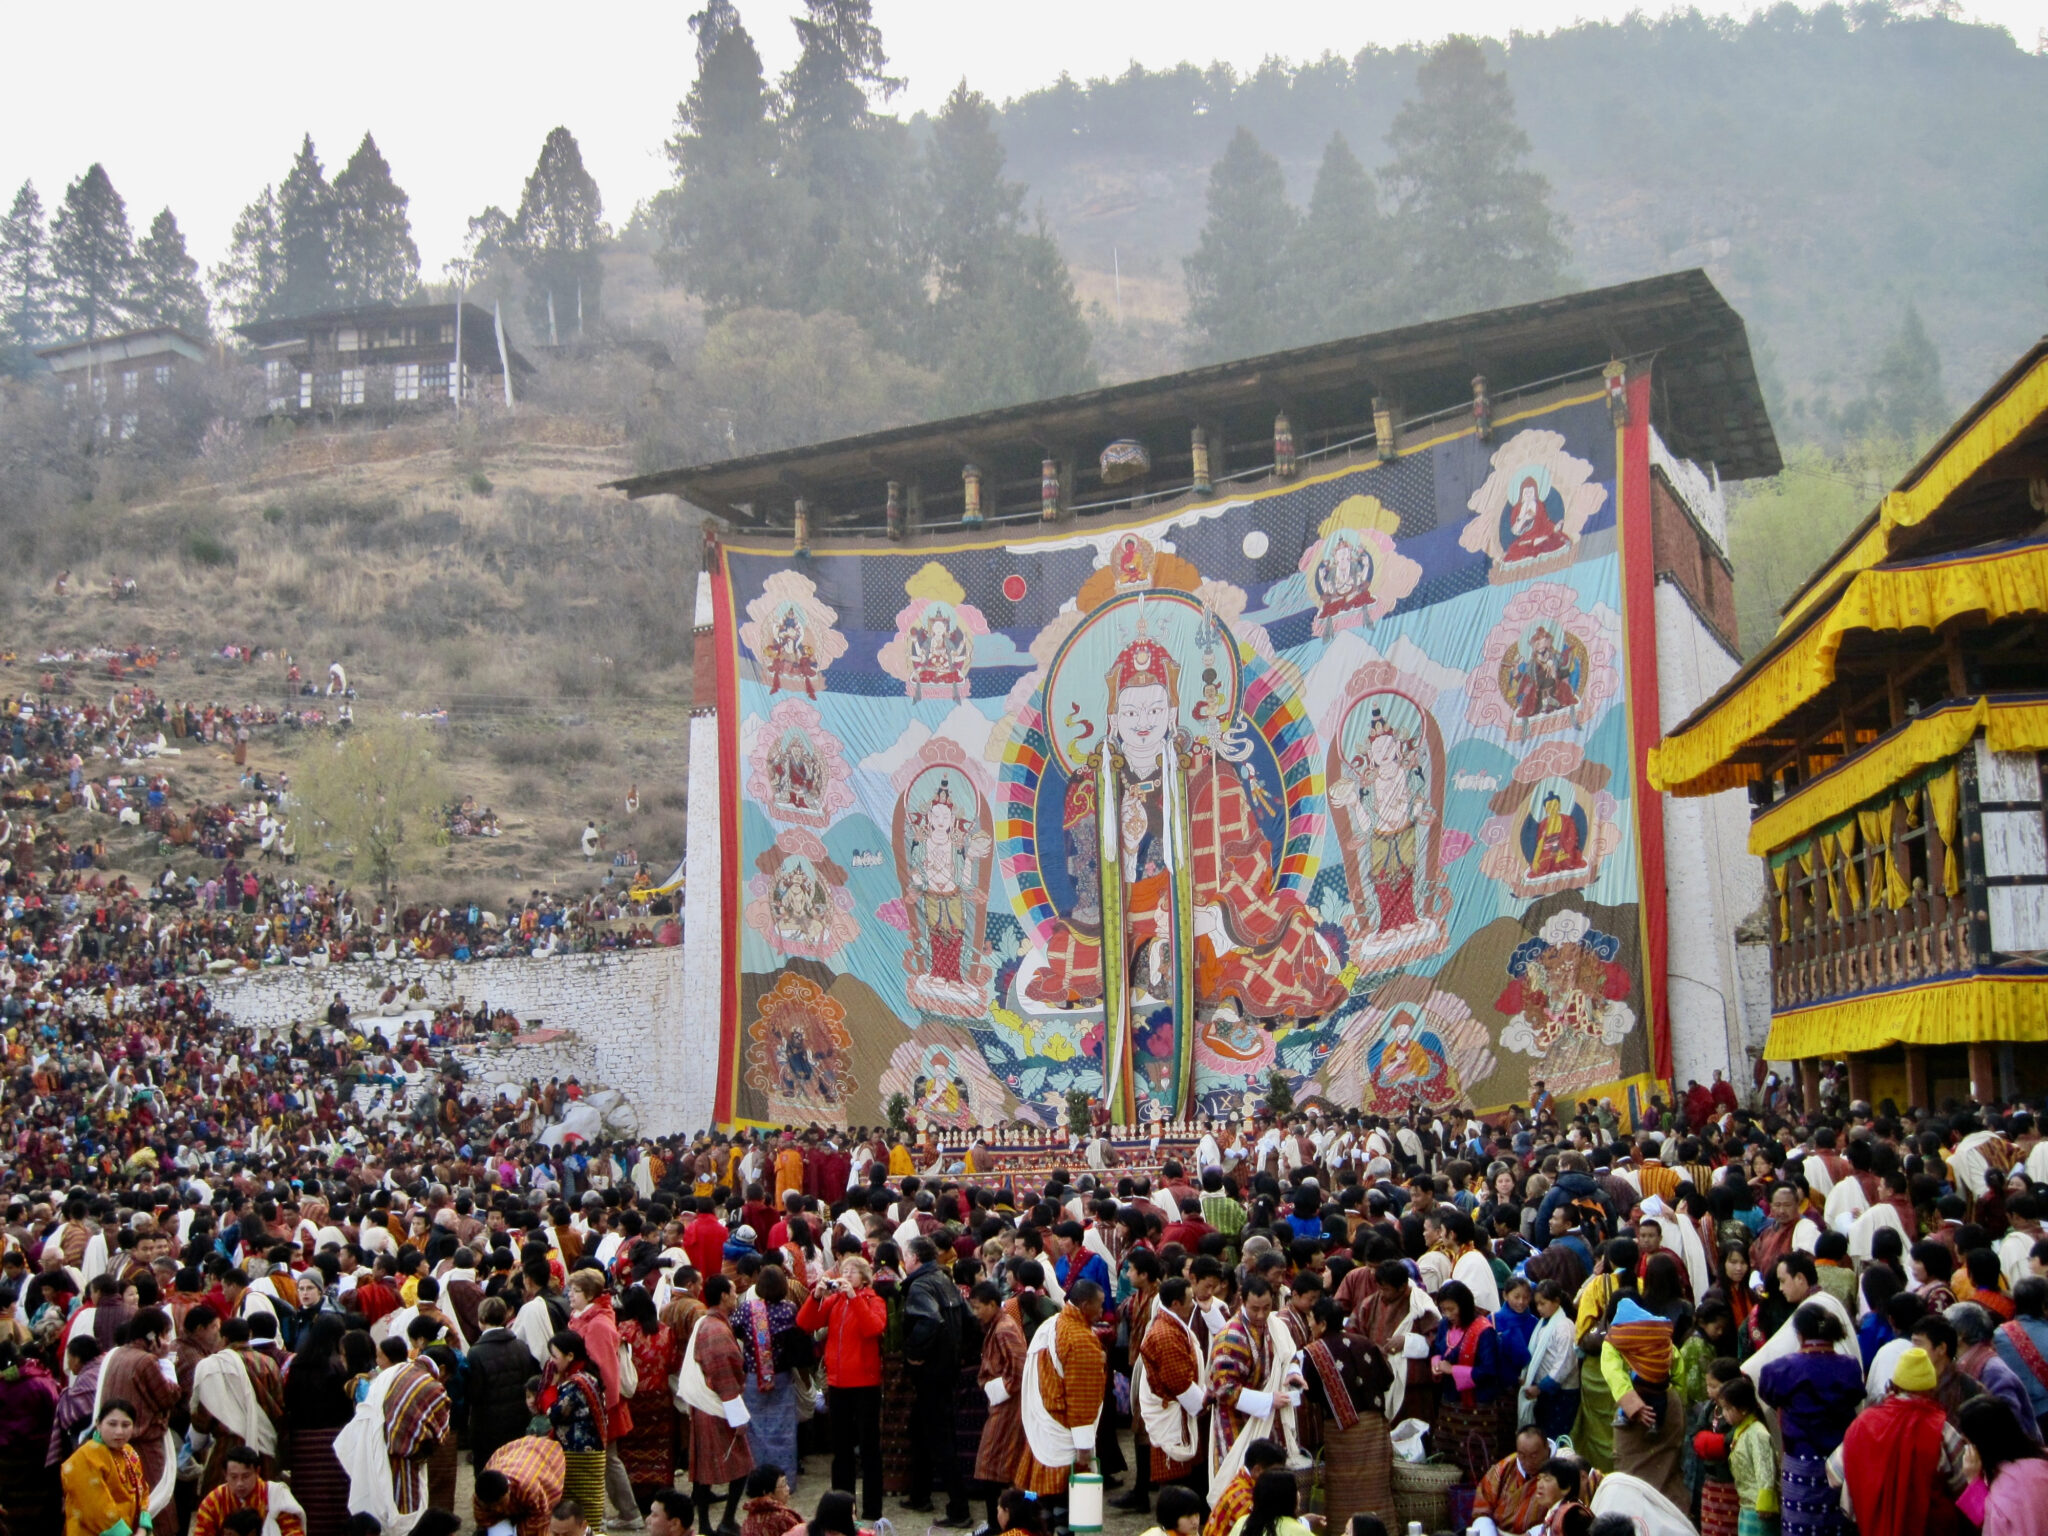 Monumental textile hung on the side of building before large crowd depicting Guru surrounded by portraits